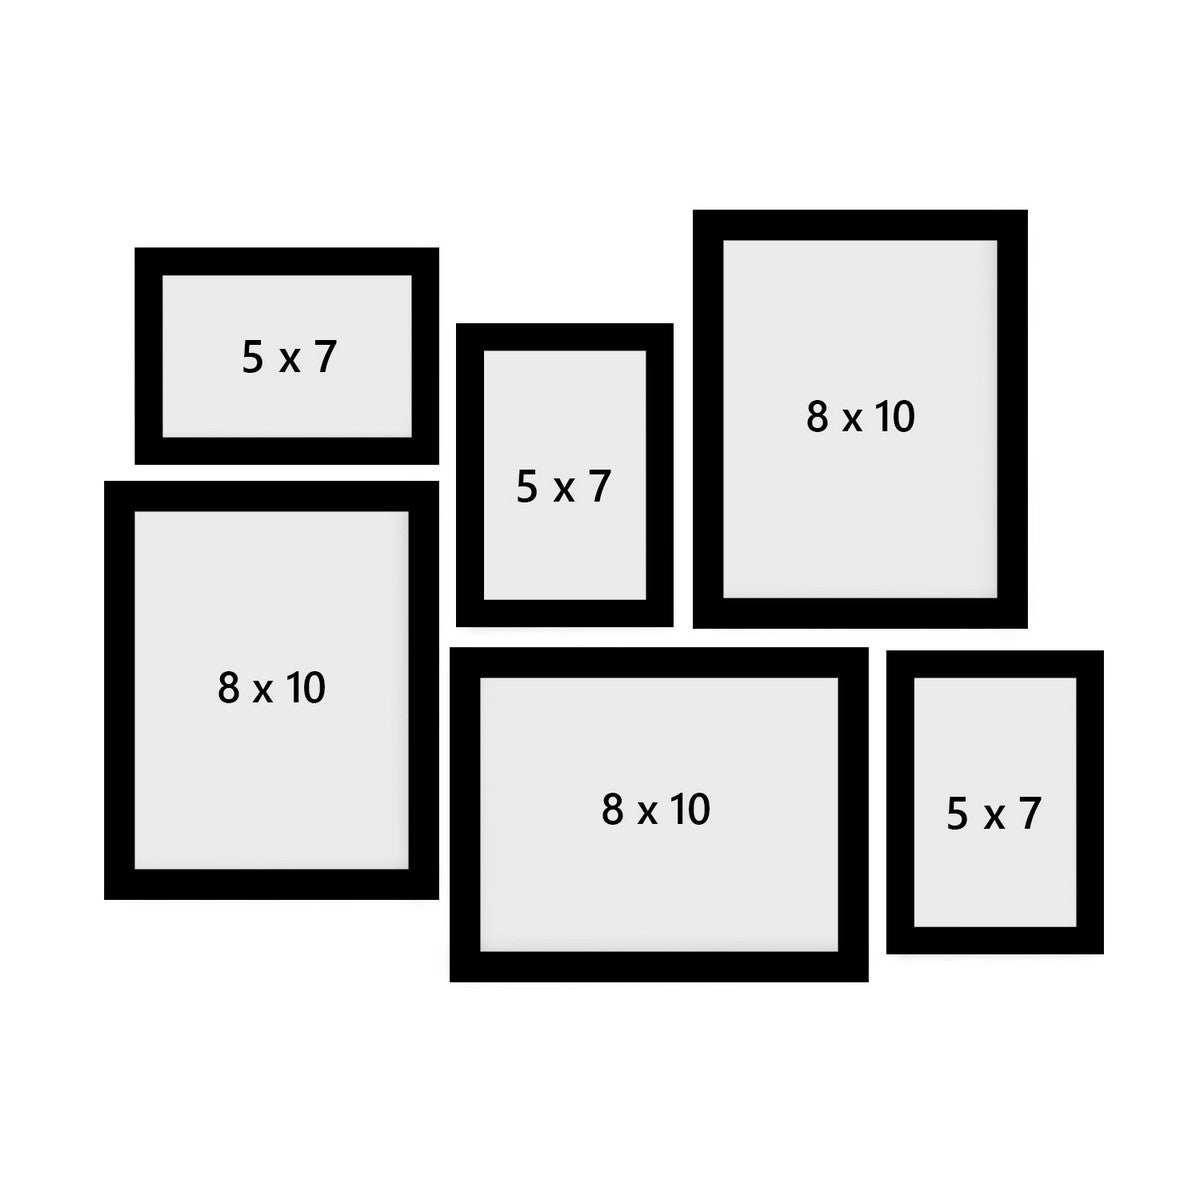 Memory Wall Collage Photo Frame - Set of 6 Photo Frames for 3 Photos of 5"x7", 3 Photos of 8"x10" 3